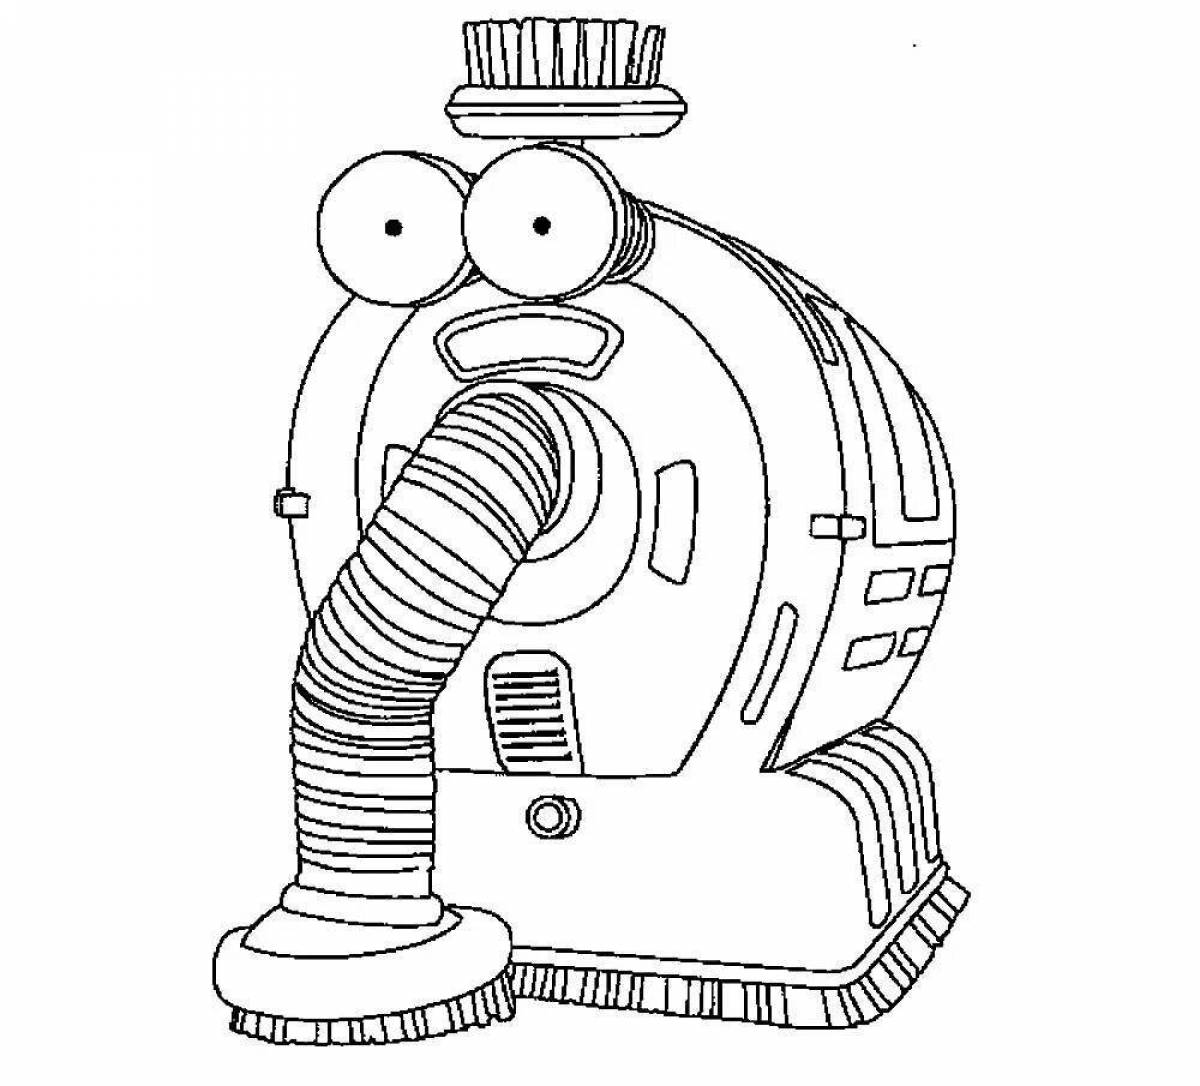 Colorful robot vacuum cleaner coloring book for boys